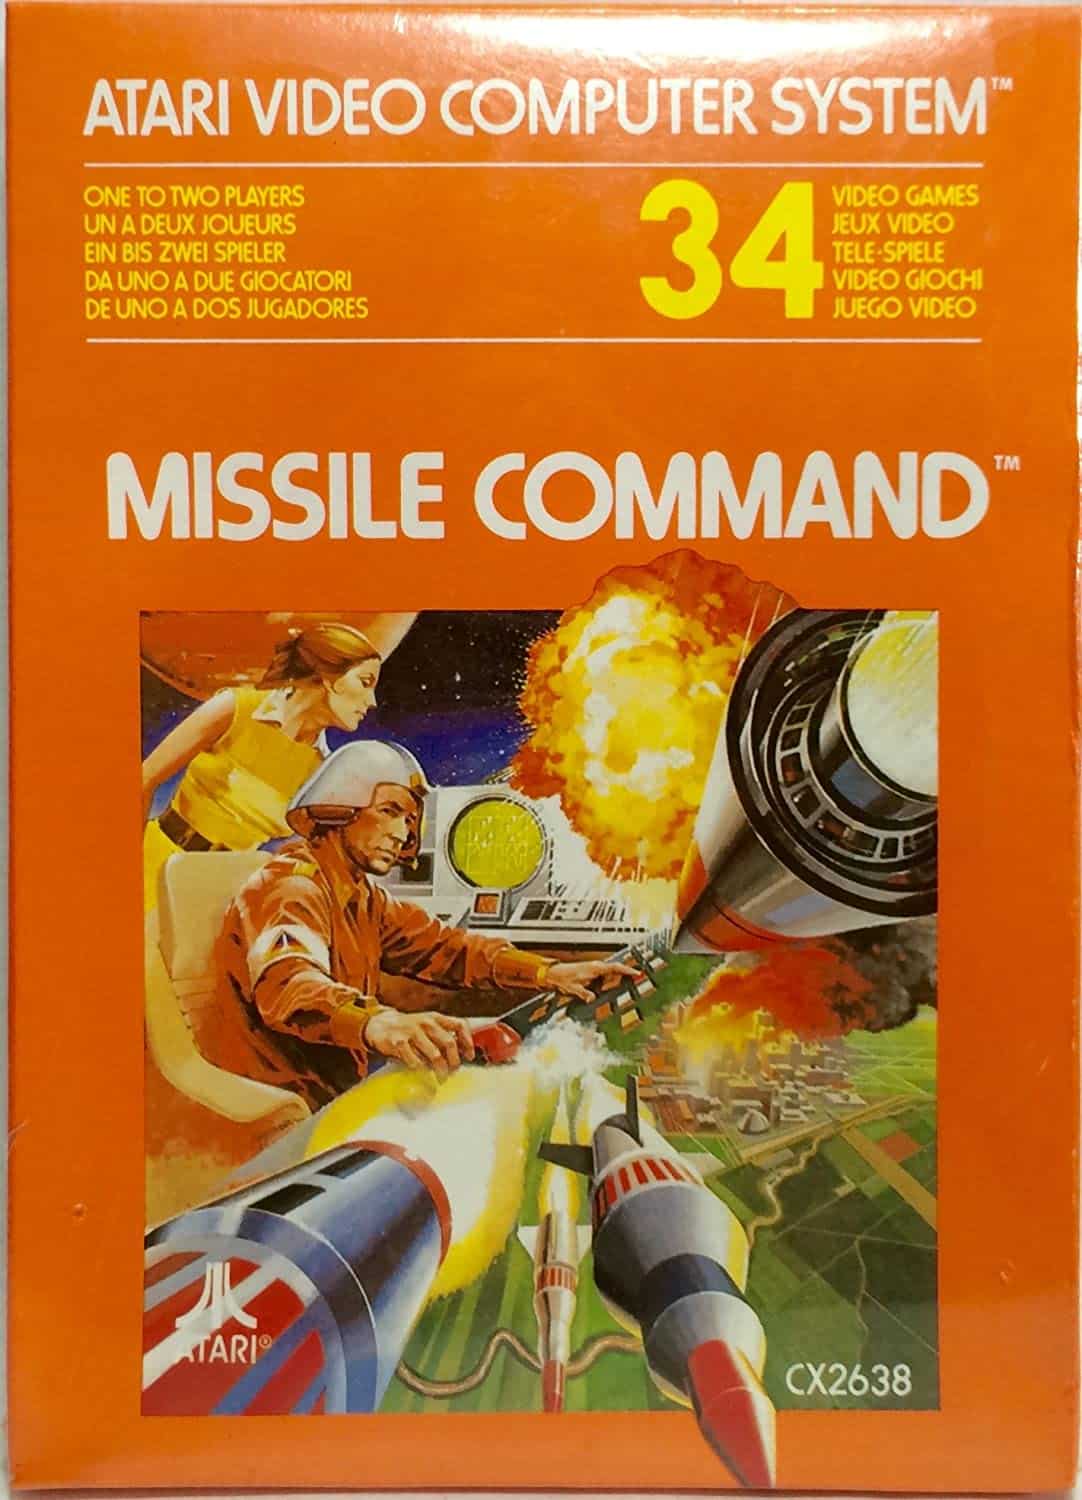 Missile Command player count stats